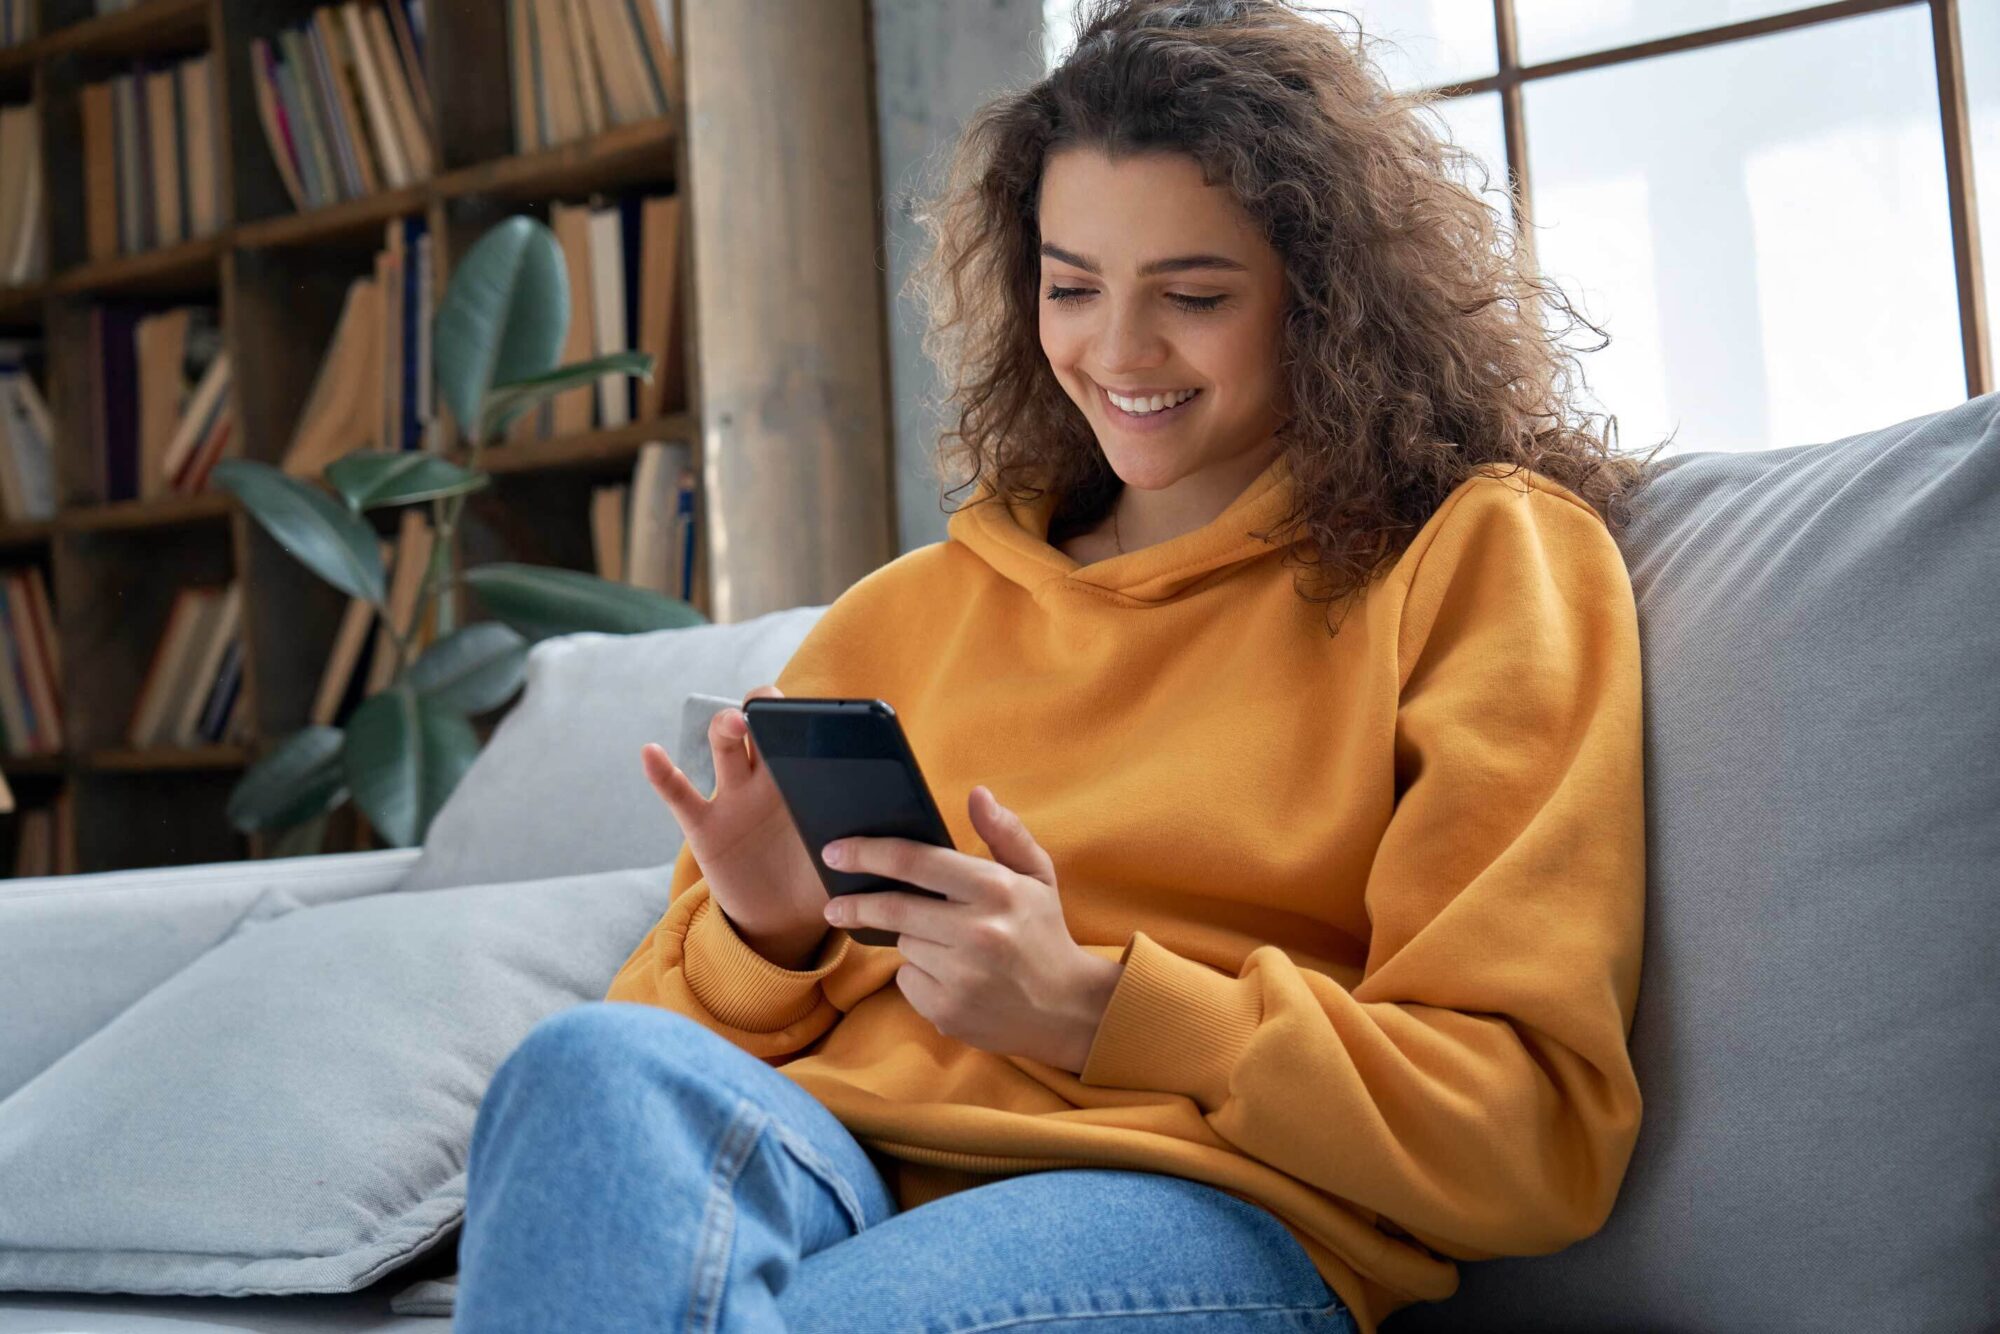 Young woman sitting on a couch smiling at her phone